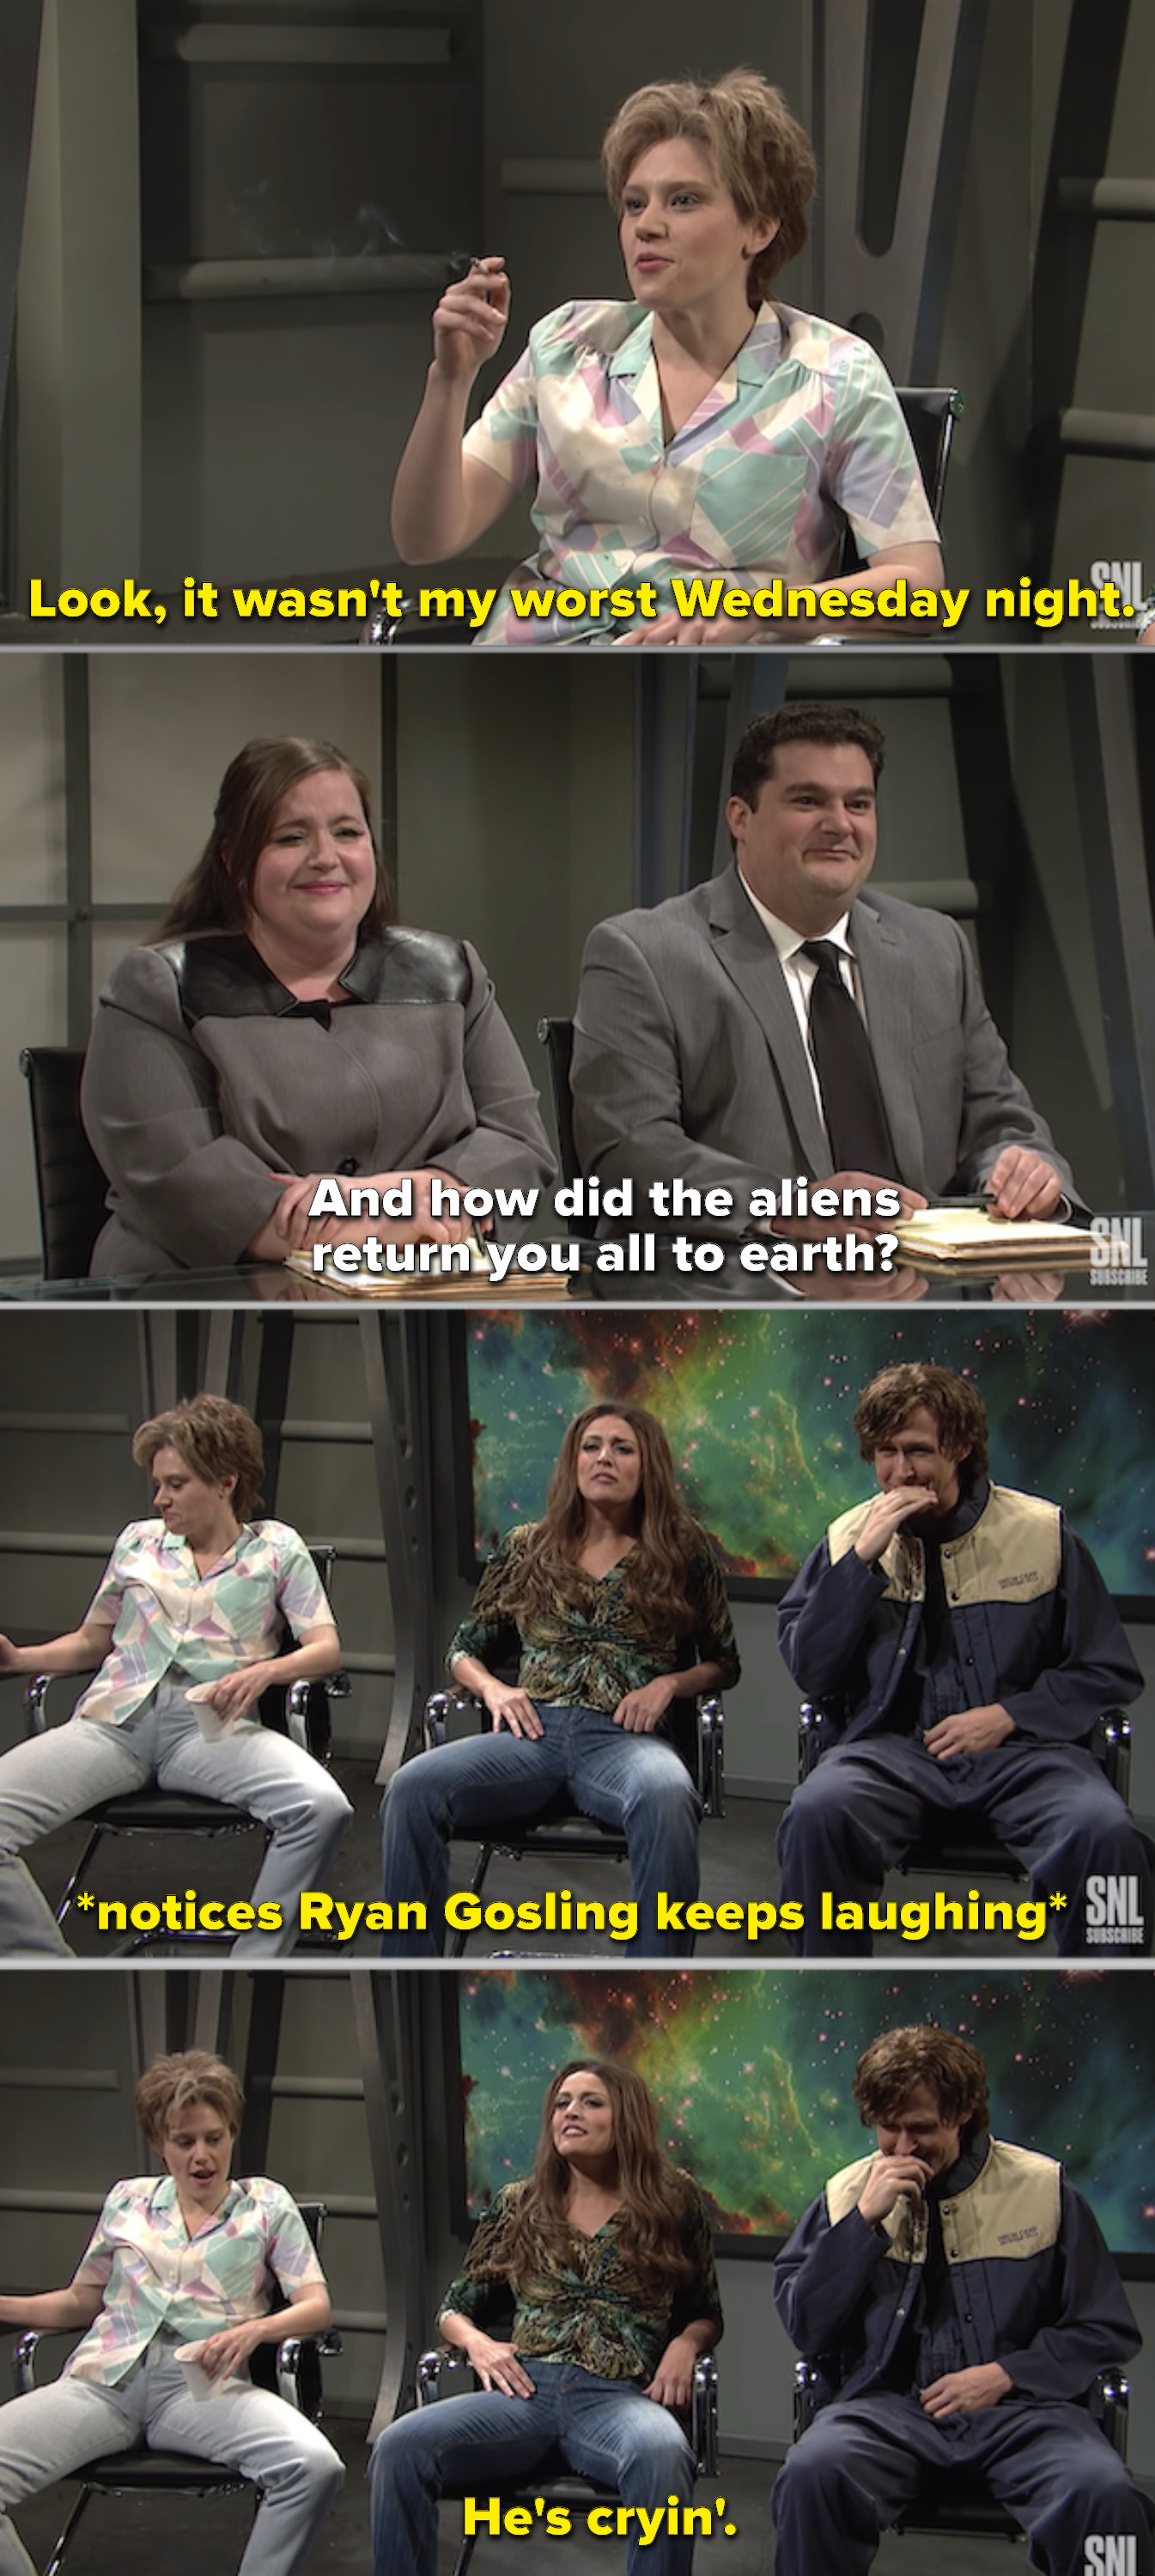 17 Funny/Inappropriate Saturday Night Live Moments